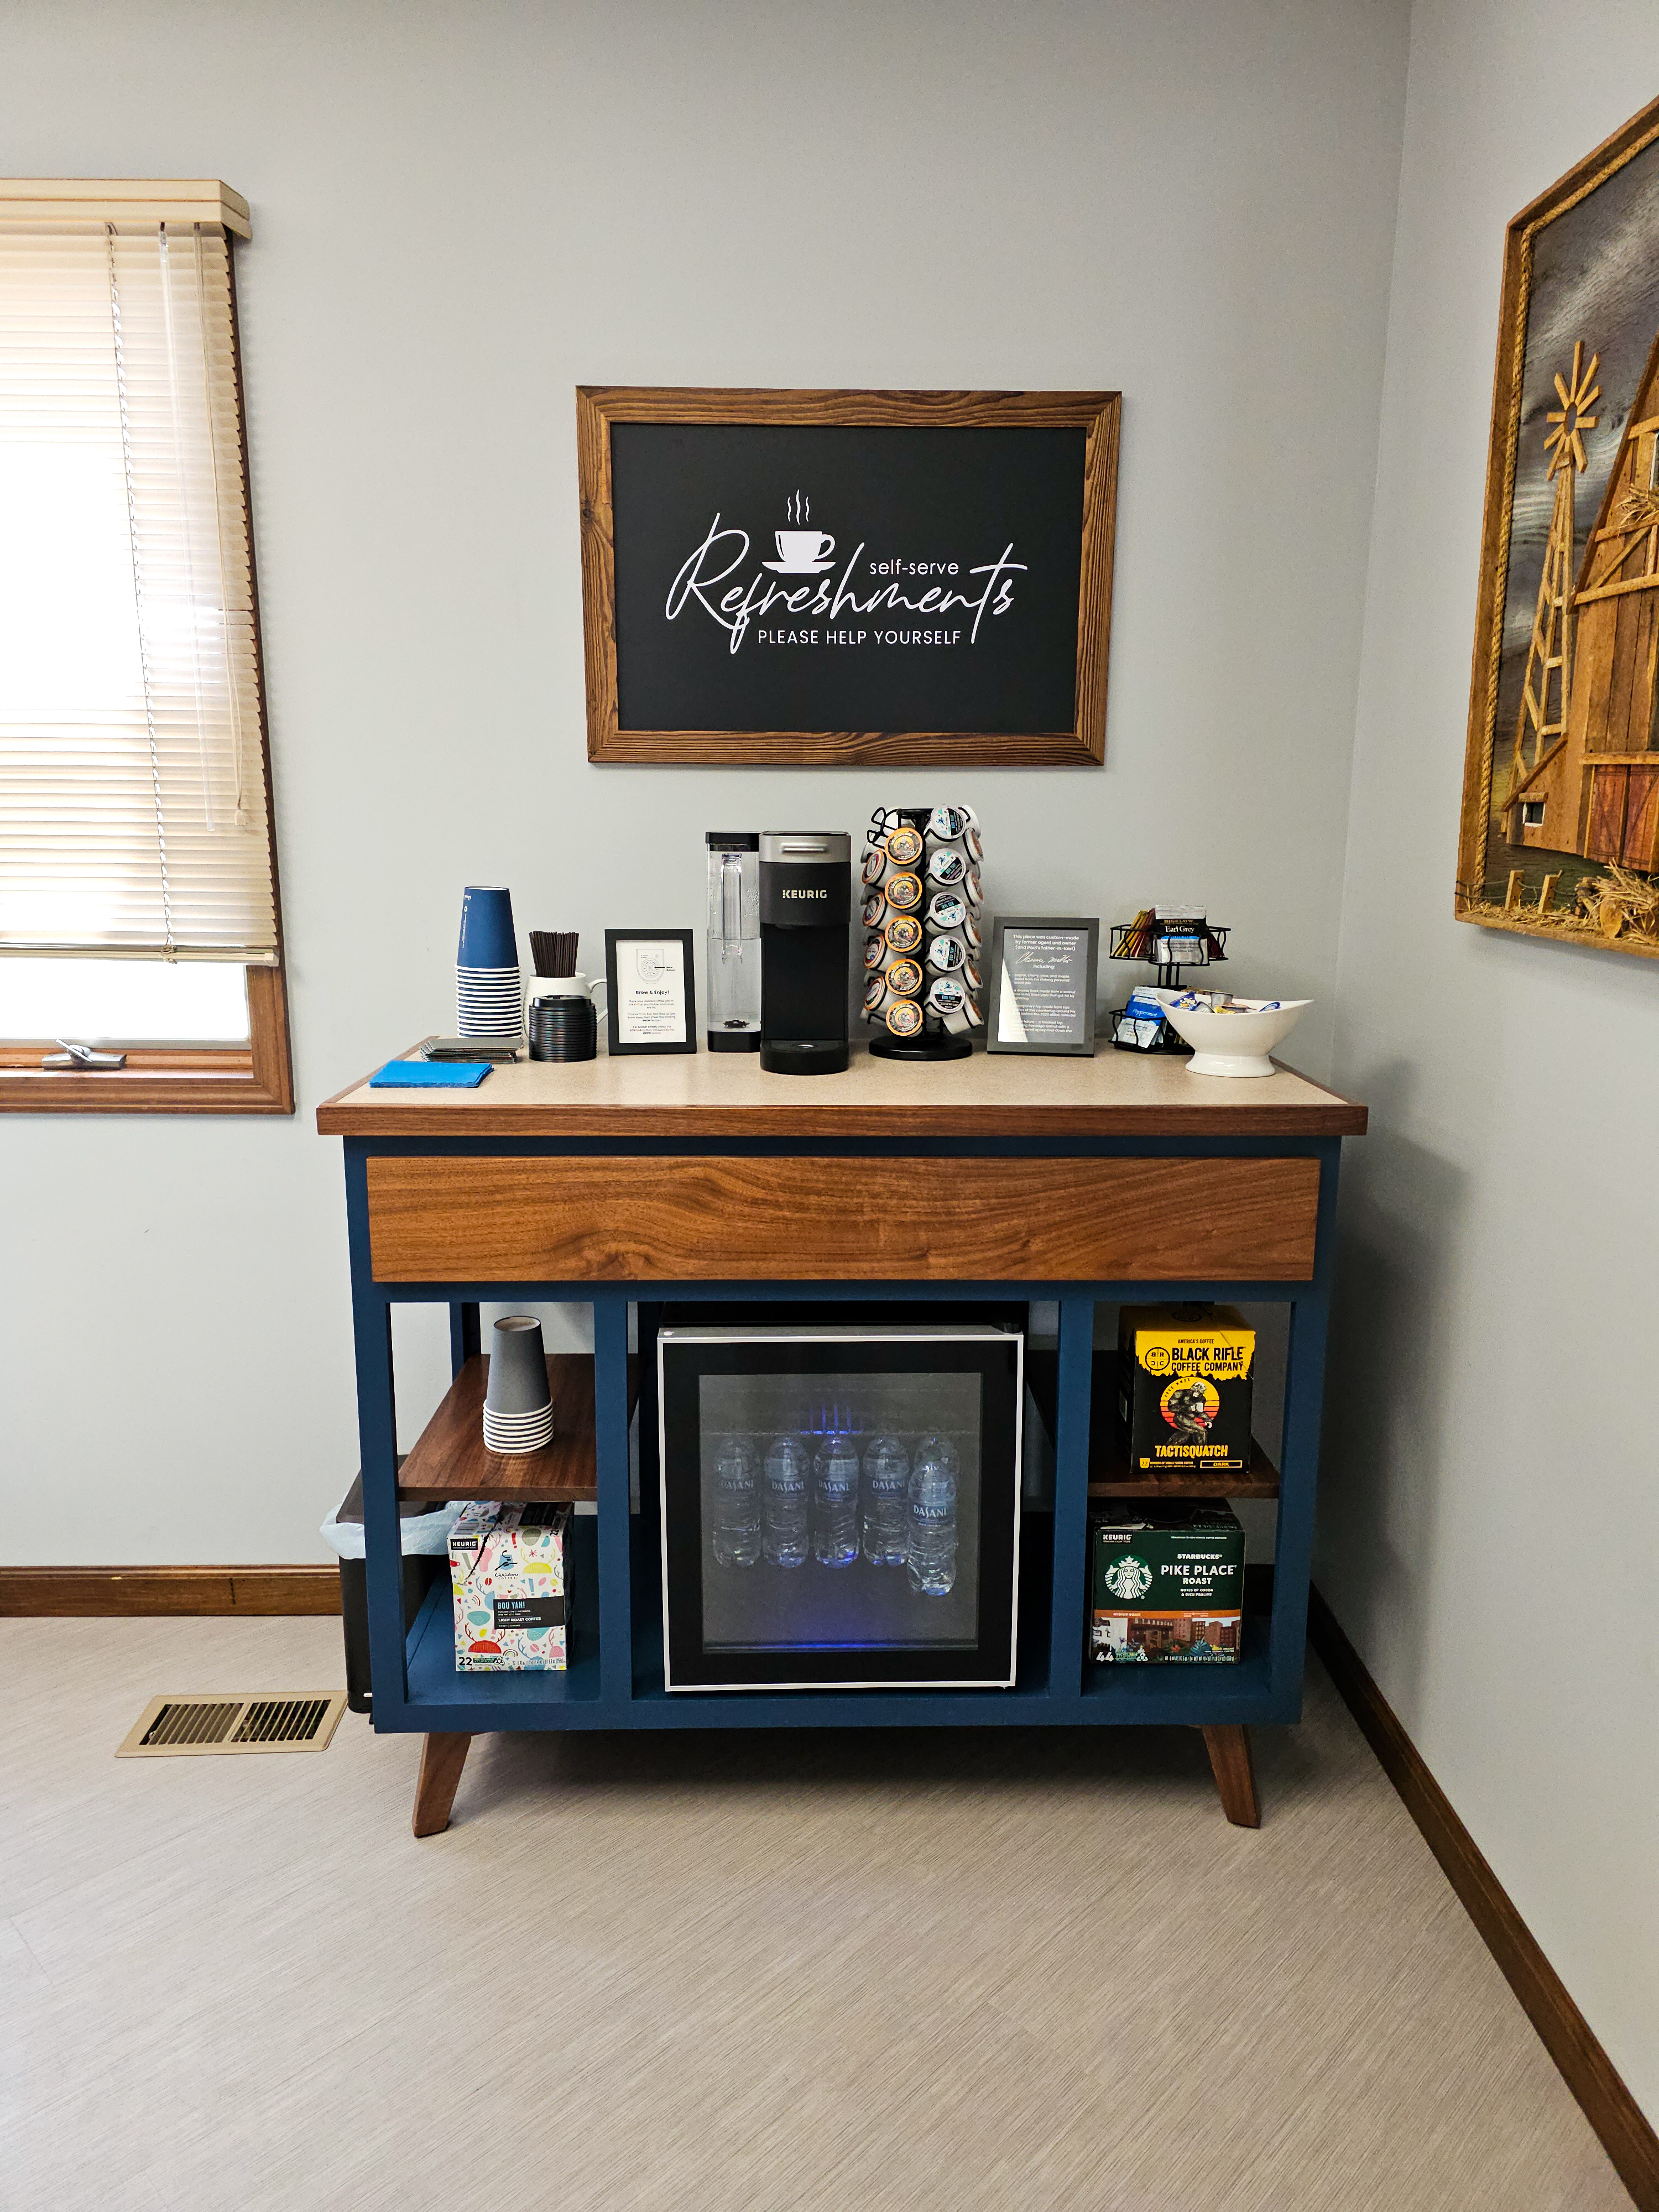 CUSTOM DESIGNED AND BUILT REFRESHMENT STAND IN THE CONFERENCE ROOM